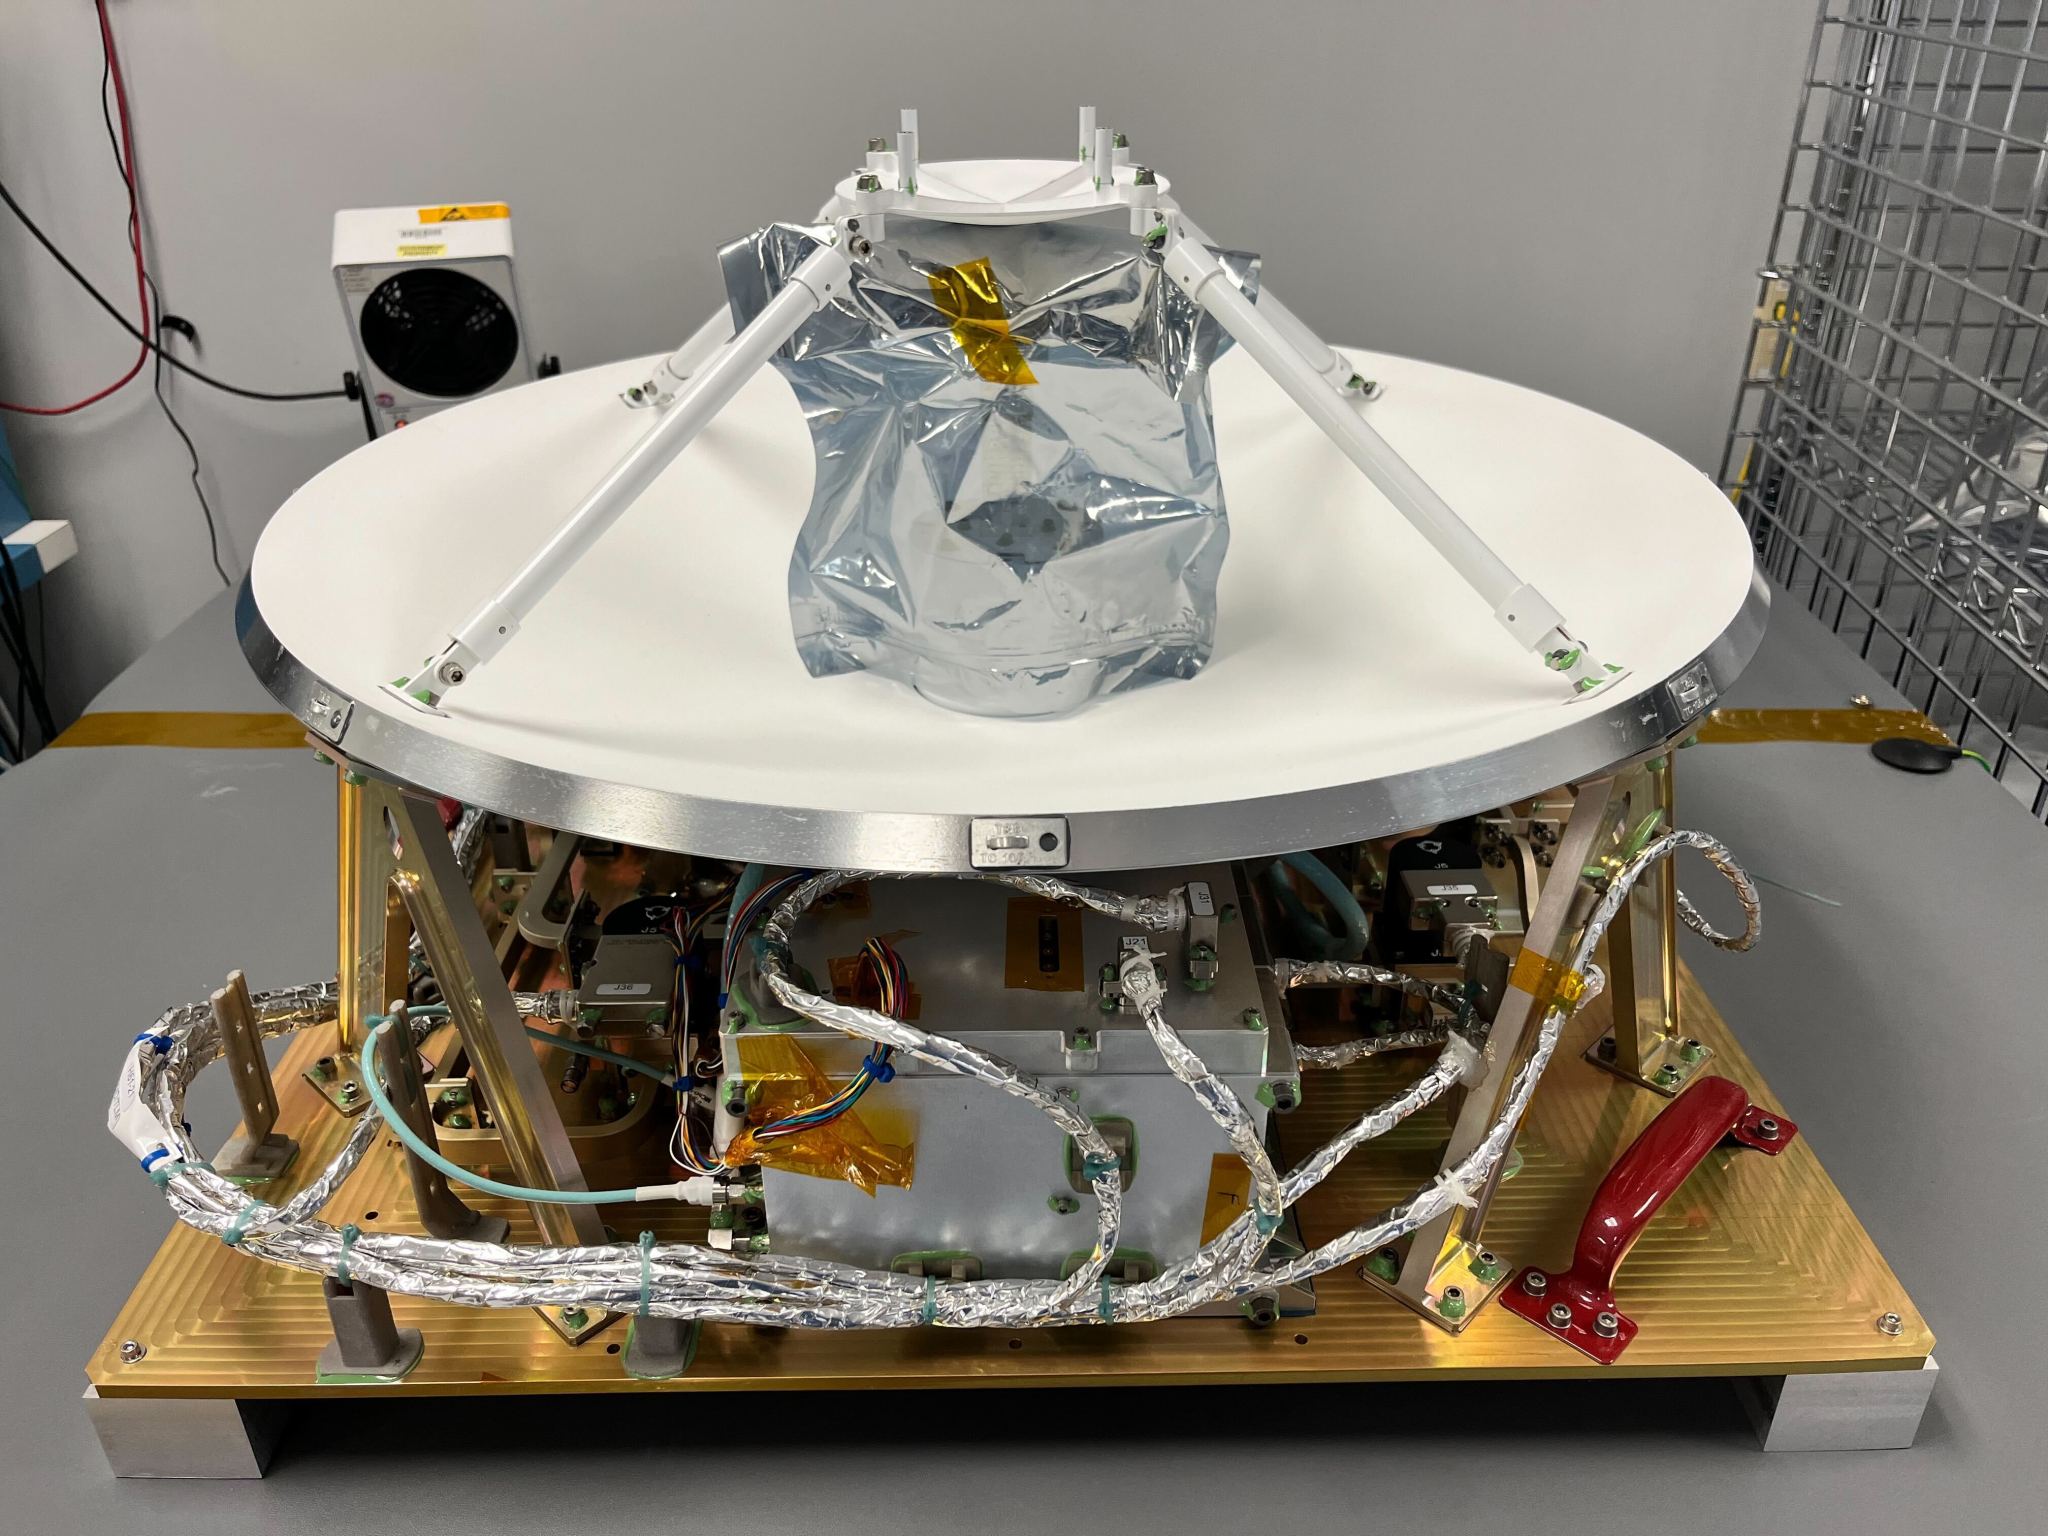 The Polylingual Experimental Terminal is the focus of this photograph. We see a white antenna dish, approximately 0.6-meters in size, facing the ceiling, sitting on a golden platform. Silver wires resembling tinfoil are shown protruding beneath the antenna dish. The terminal sits on top of a grey table inside a white laboratory.